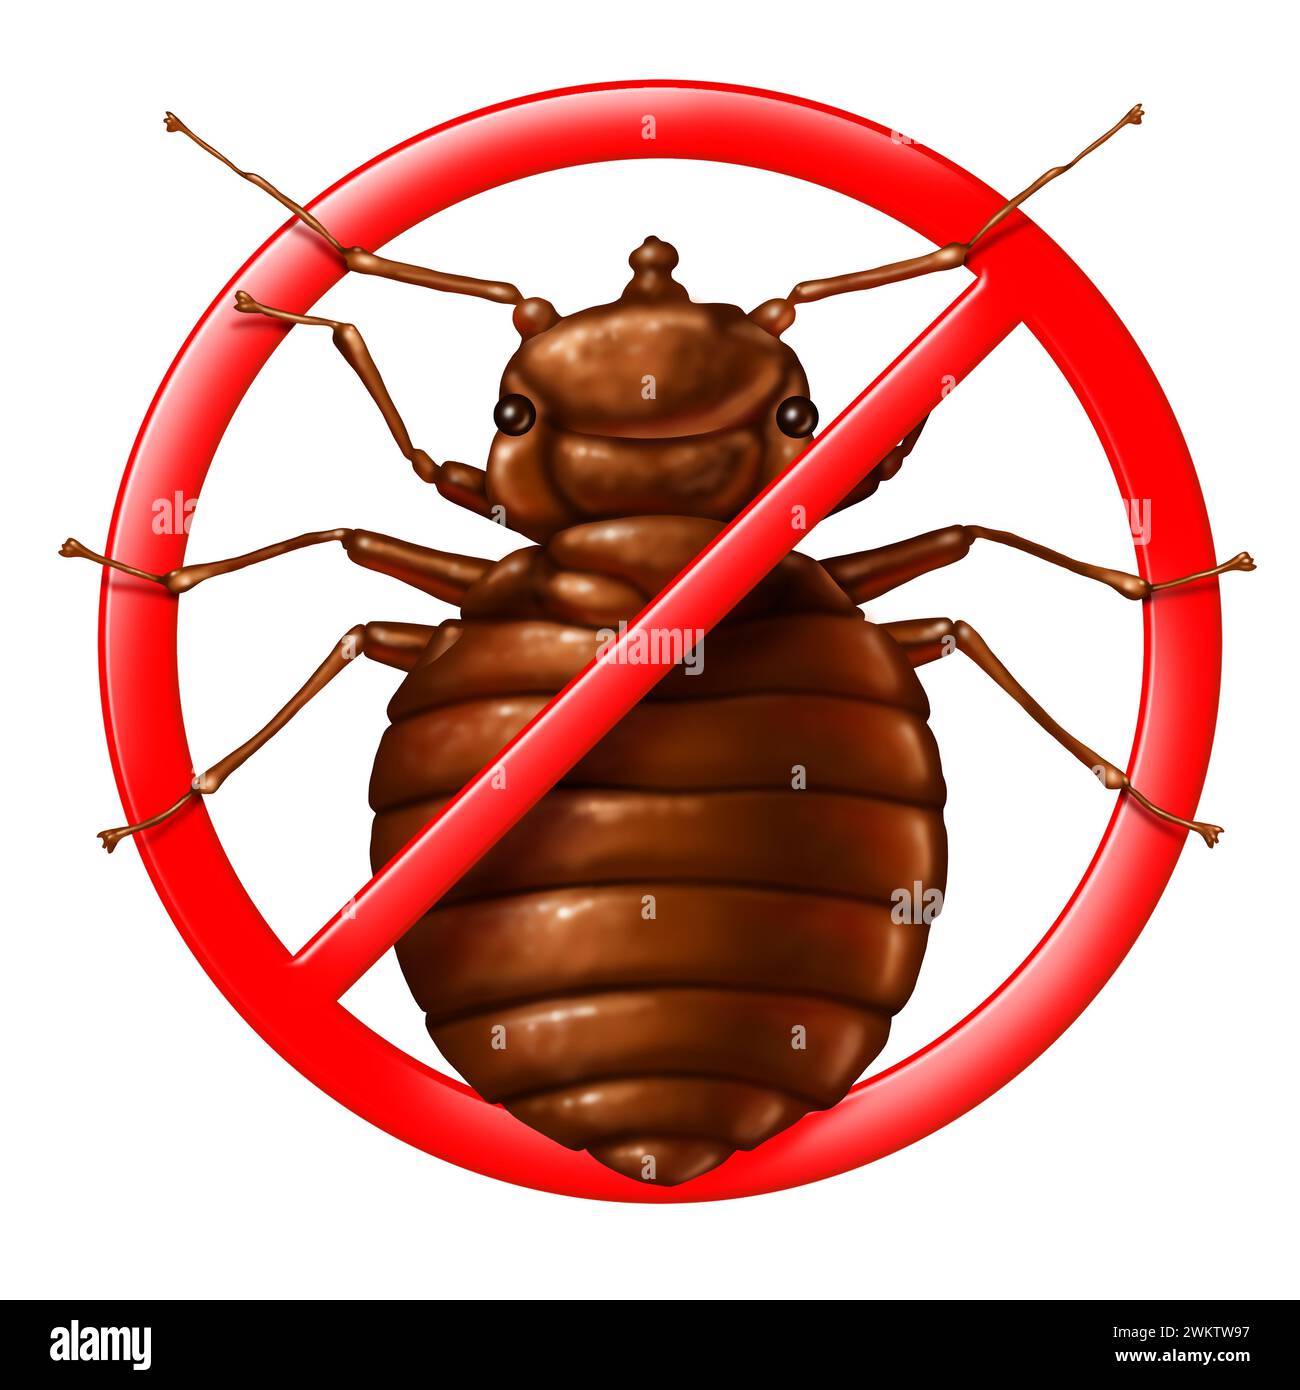 Bed Bug Eradication and Bedbug pest control or bedbugs infestation as Hotels or home infested with bed parasites as a symbol for insect extermination Stock Photo